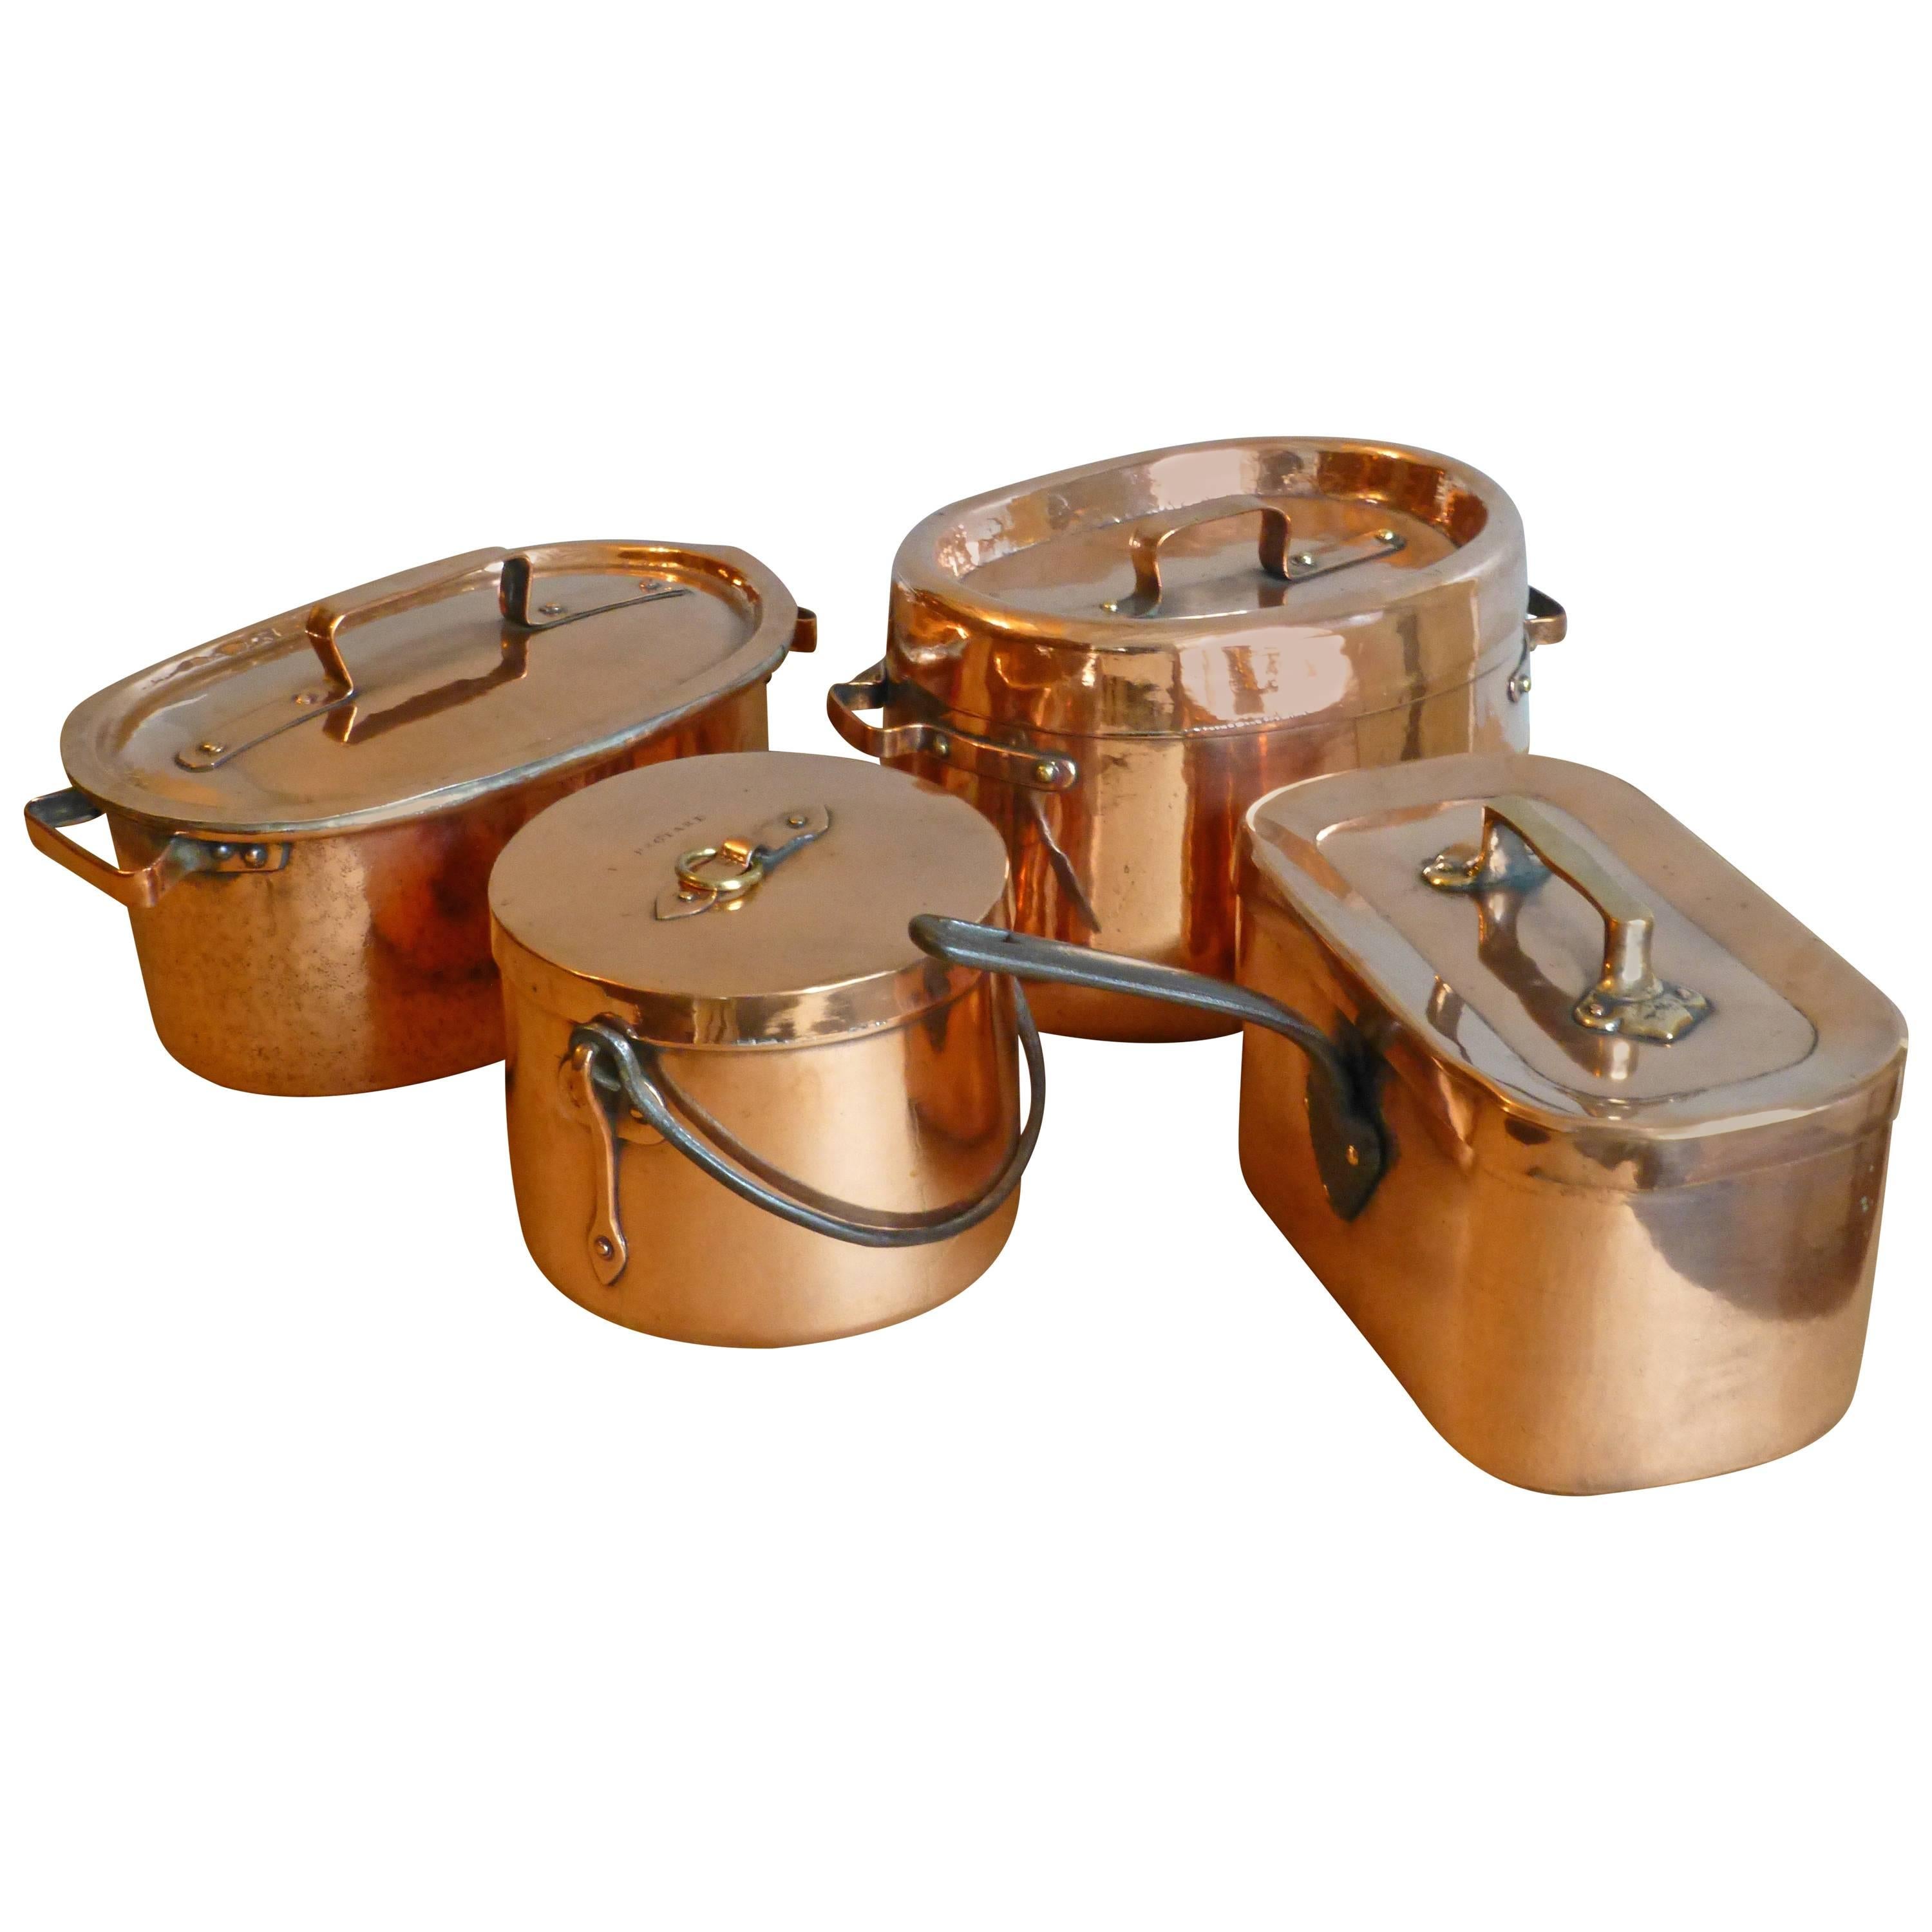 Magnificent French Set of Re-Tinned Copper Pans, Copper Pots